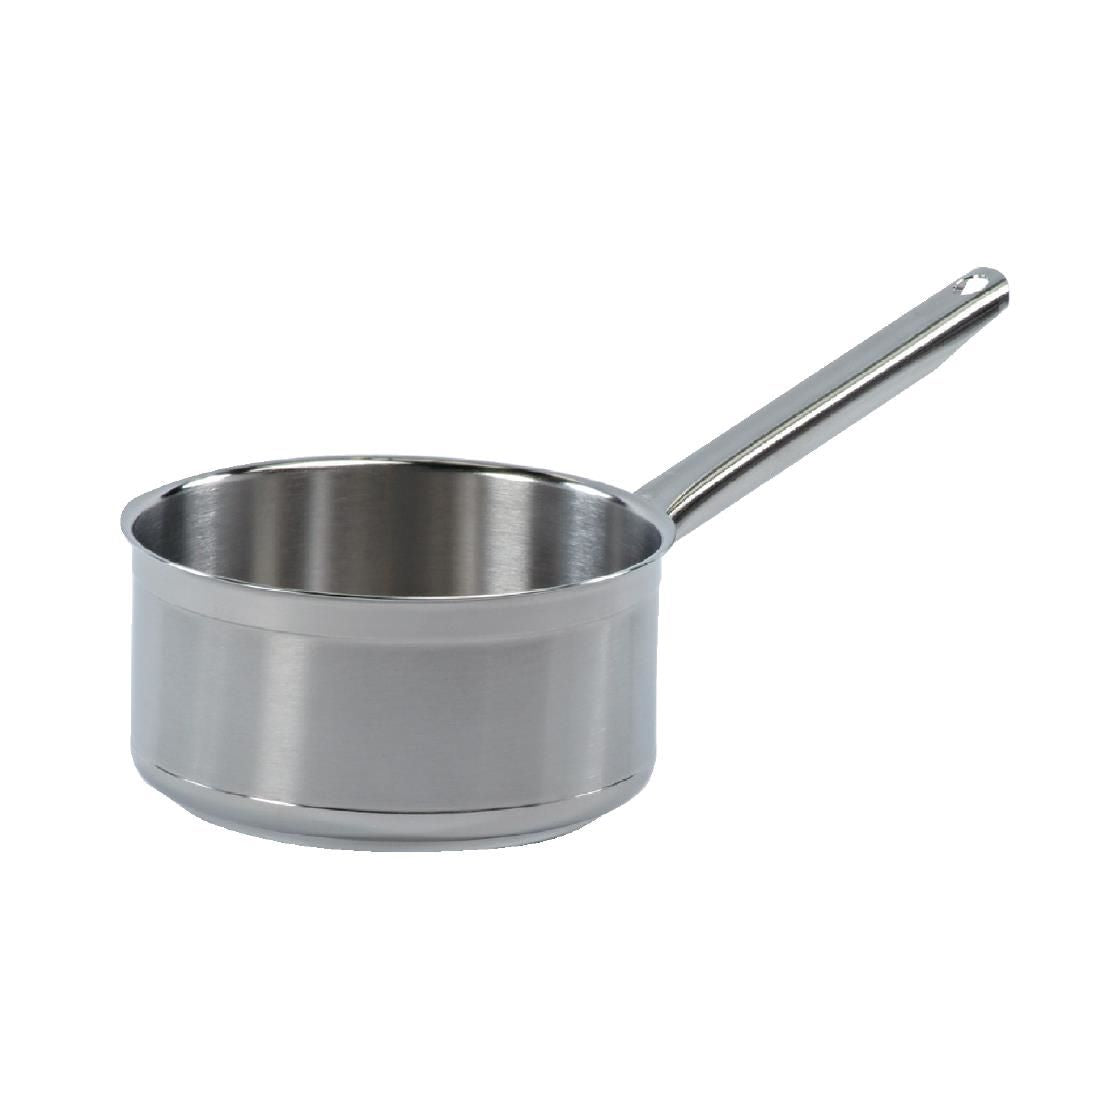 Bourgeat Tradition Plus Stainless Steel Saucepan 1.2Ltr JD Catering Equipment Solutions Ltd